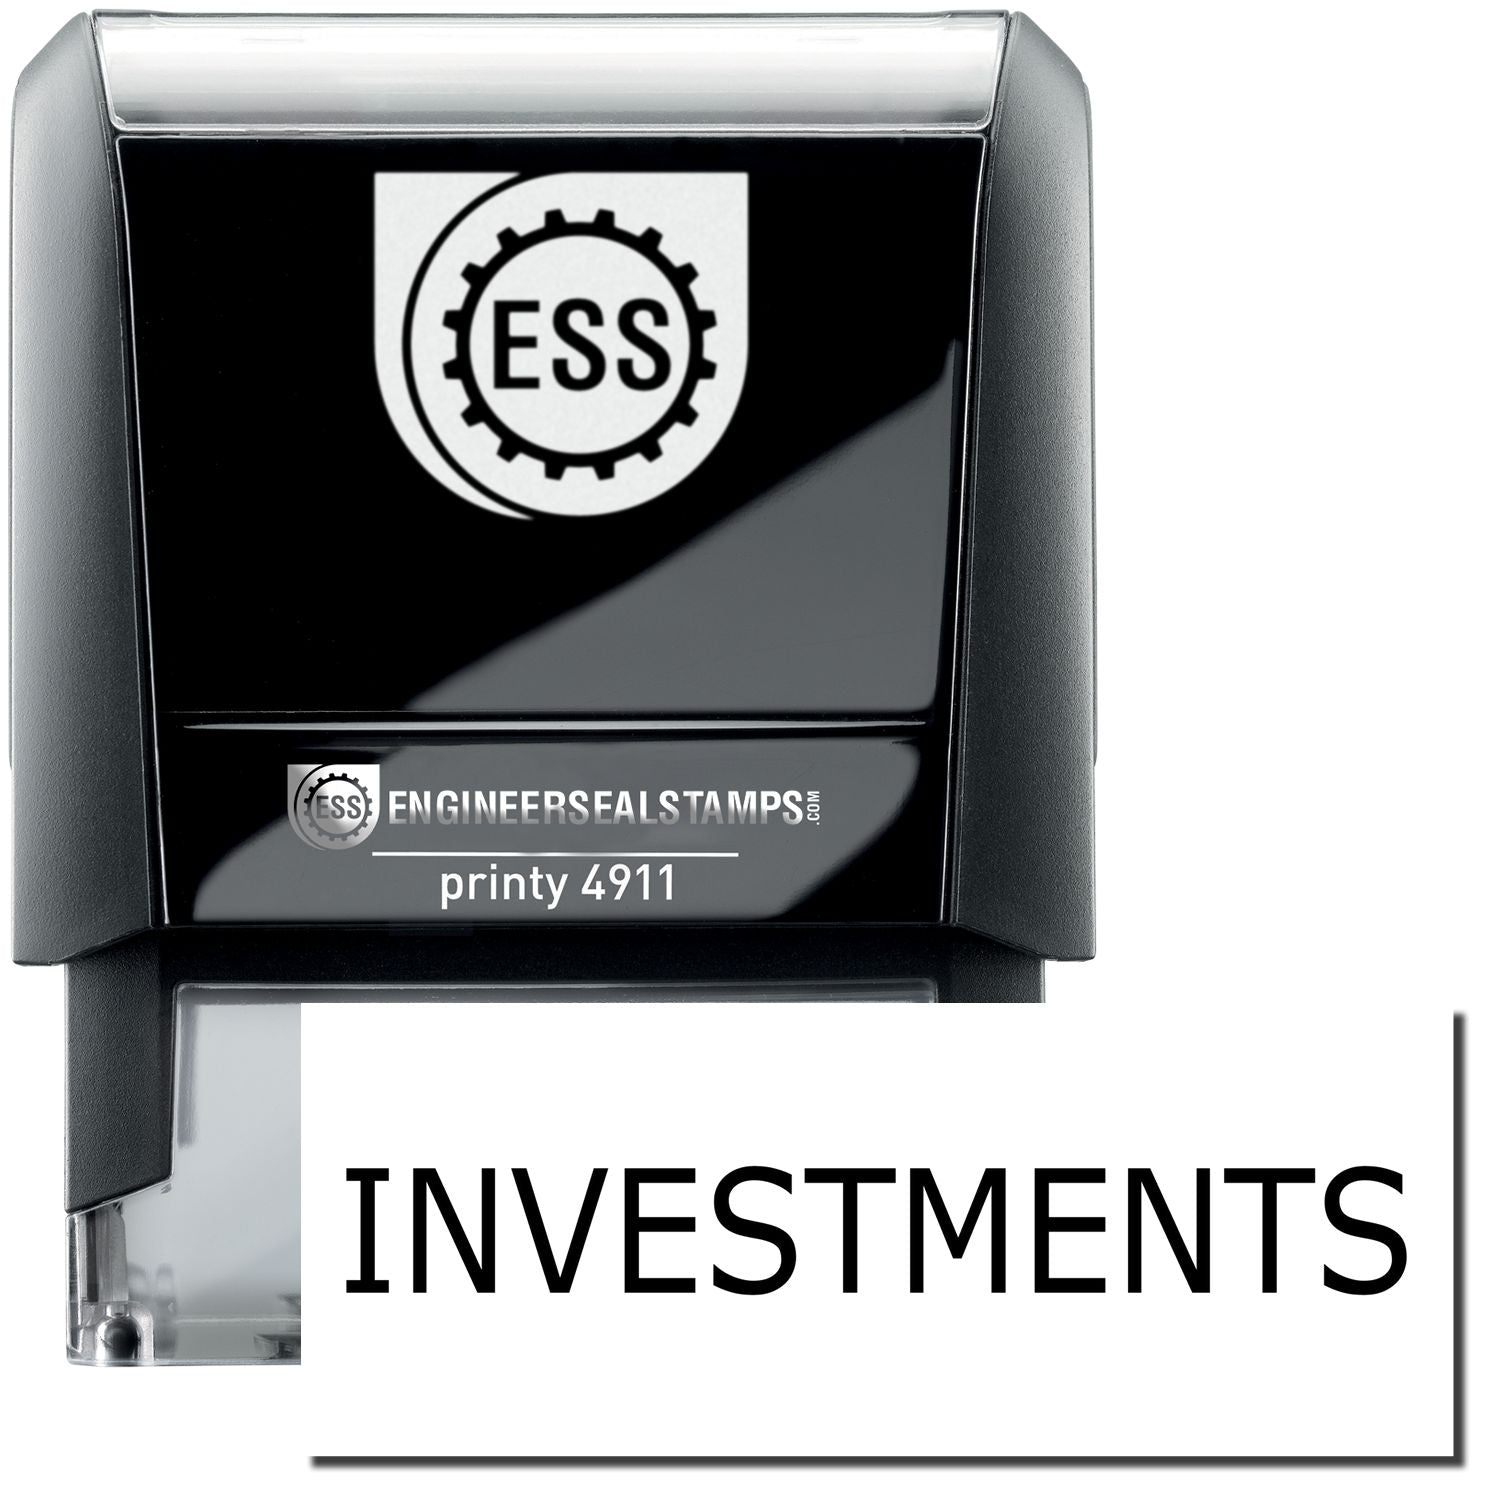 A self-inking stamp with a stamped image showing how the text "INVESTMENTS" is displayed after stamping.